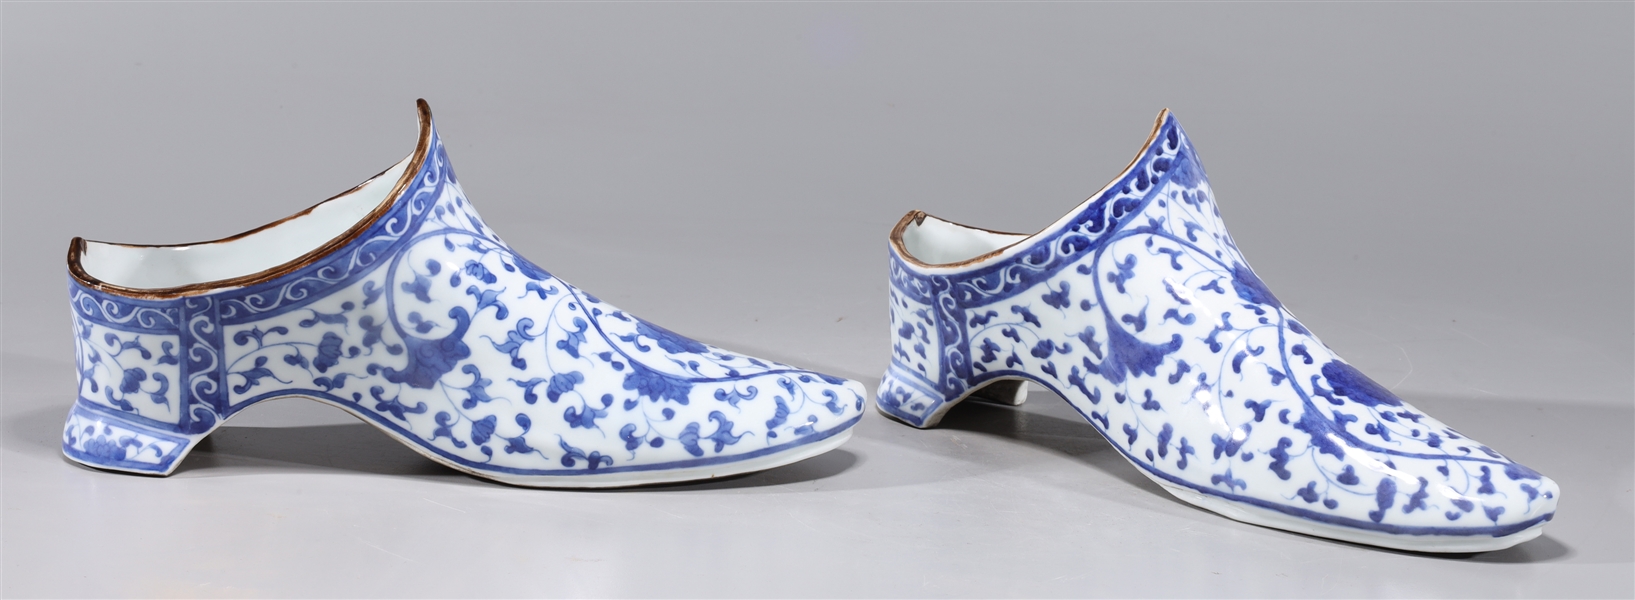 Pair of Chinese blue and white porcelain